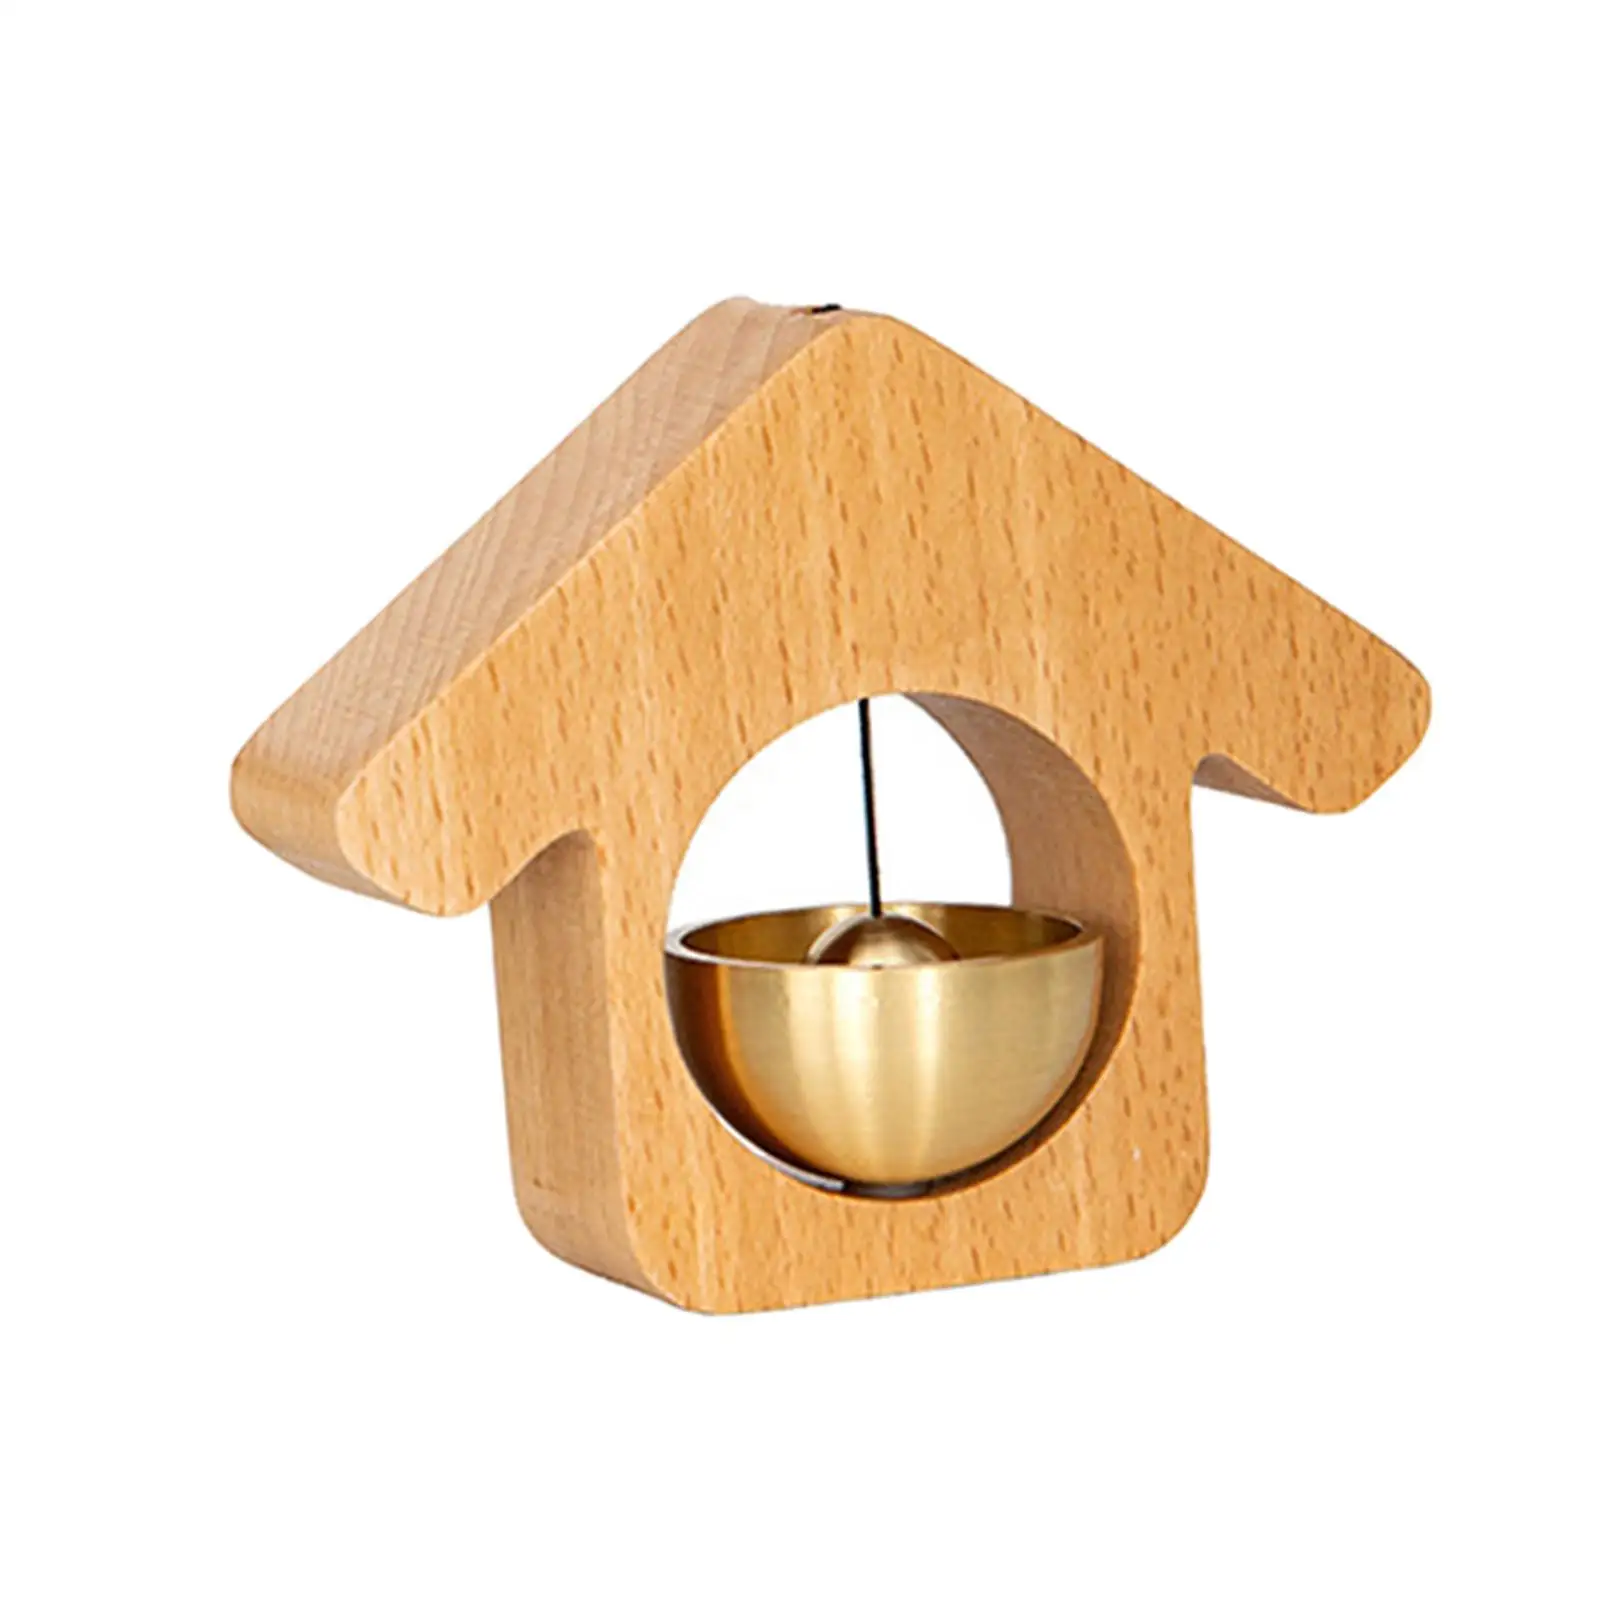 Wood Shopkeepers Bell Hanging Bell Decorative for Shop Ornaments